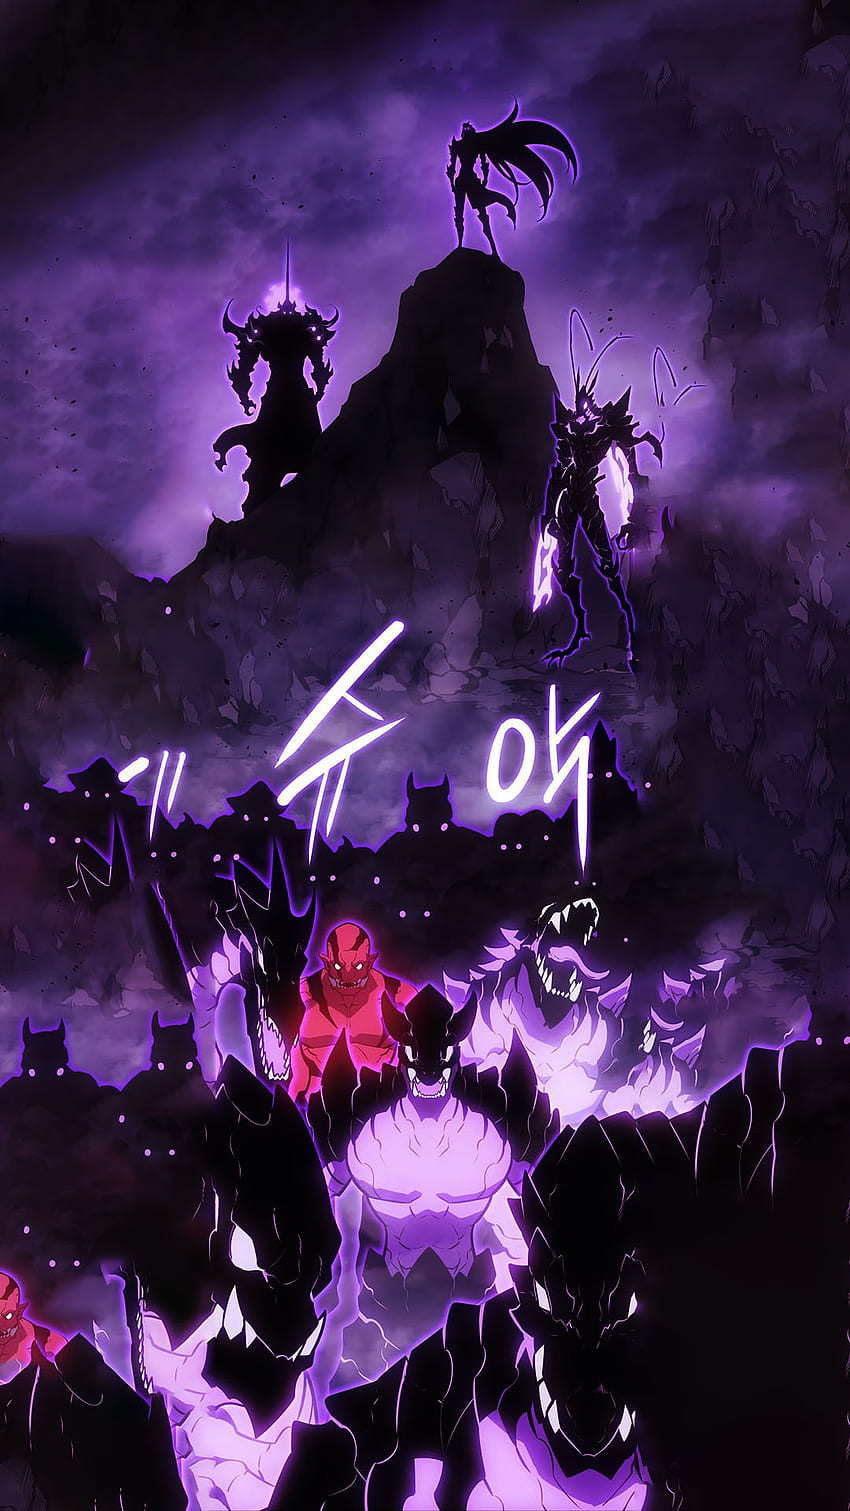 Solo leveling, only i level up, dimensional crack, new shadow army, shadow army, shadow lord, hunter, korean, second battle, manghwa, shadow monarch, sung jinwoo HD phone wallpaper